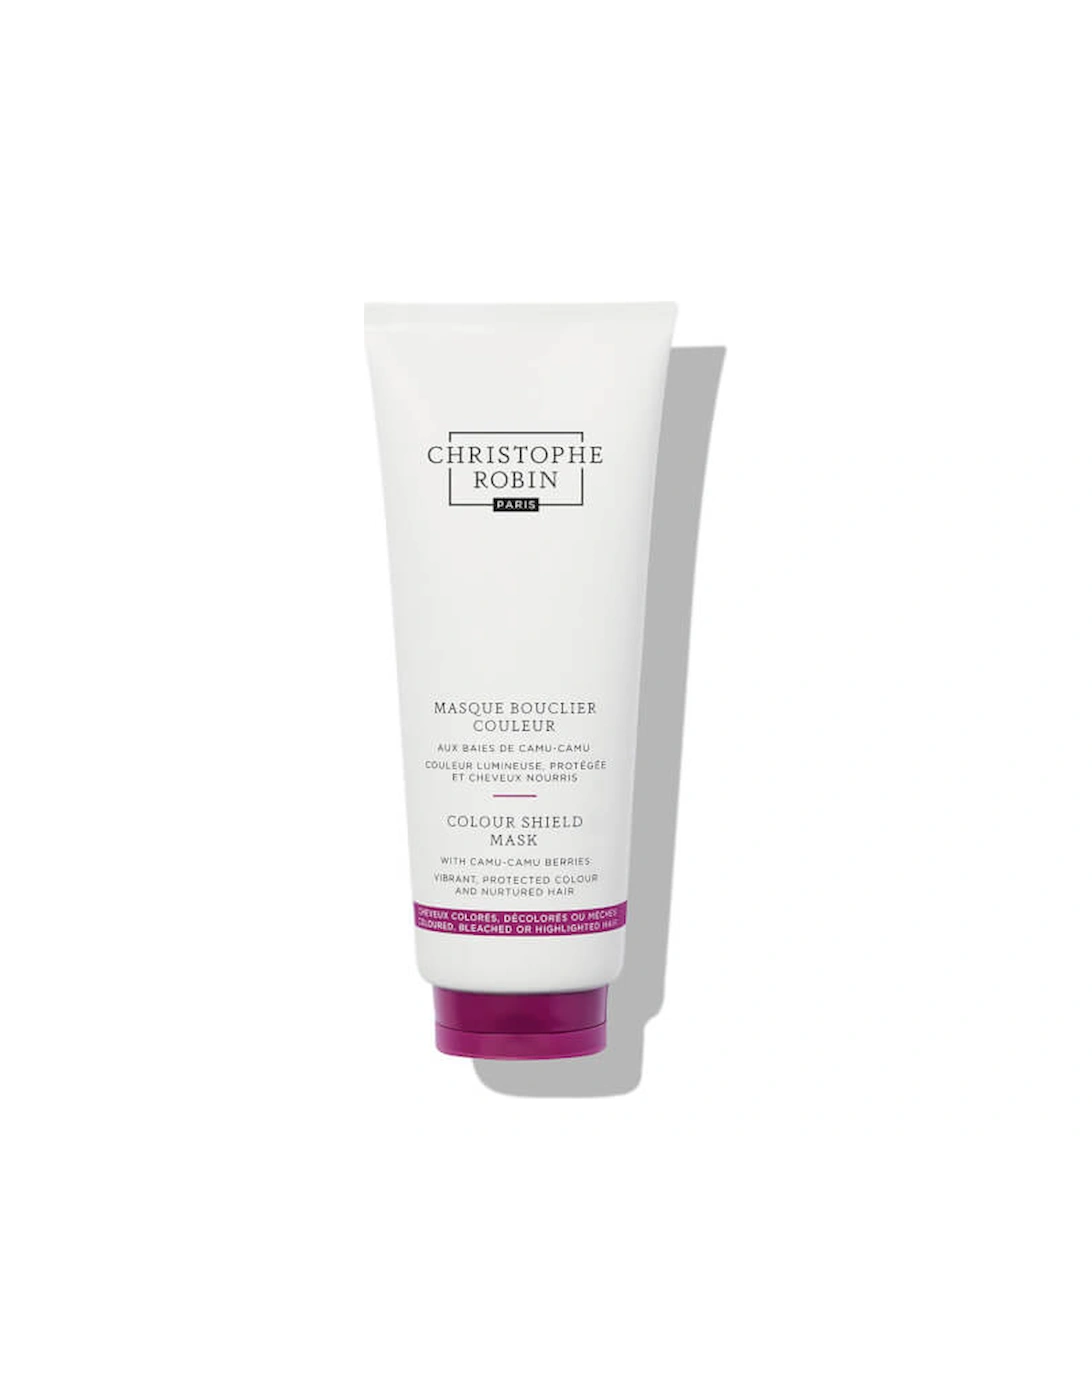 Colour Shield Mask with Camu Camu Berries 200ml - Christophe Robin, 2 of 1